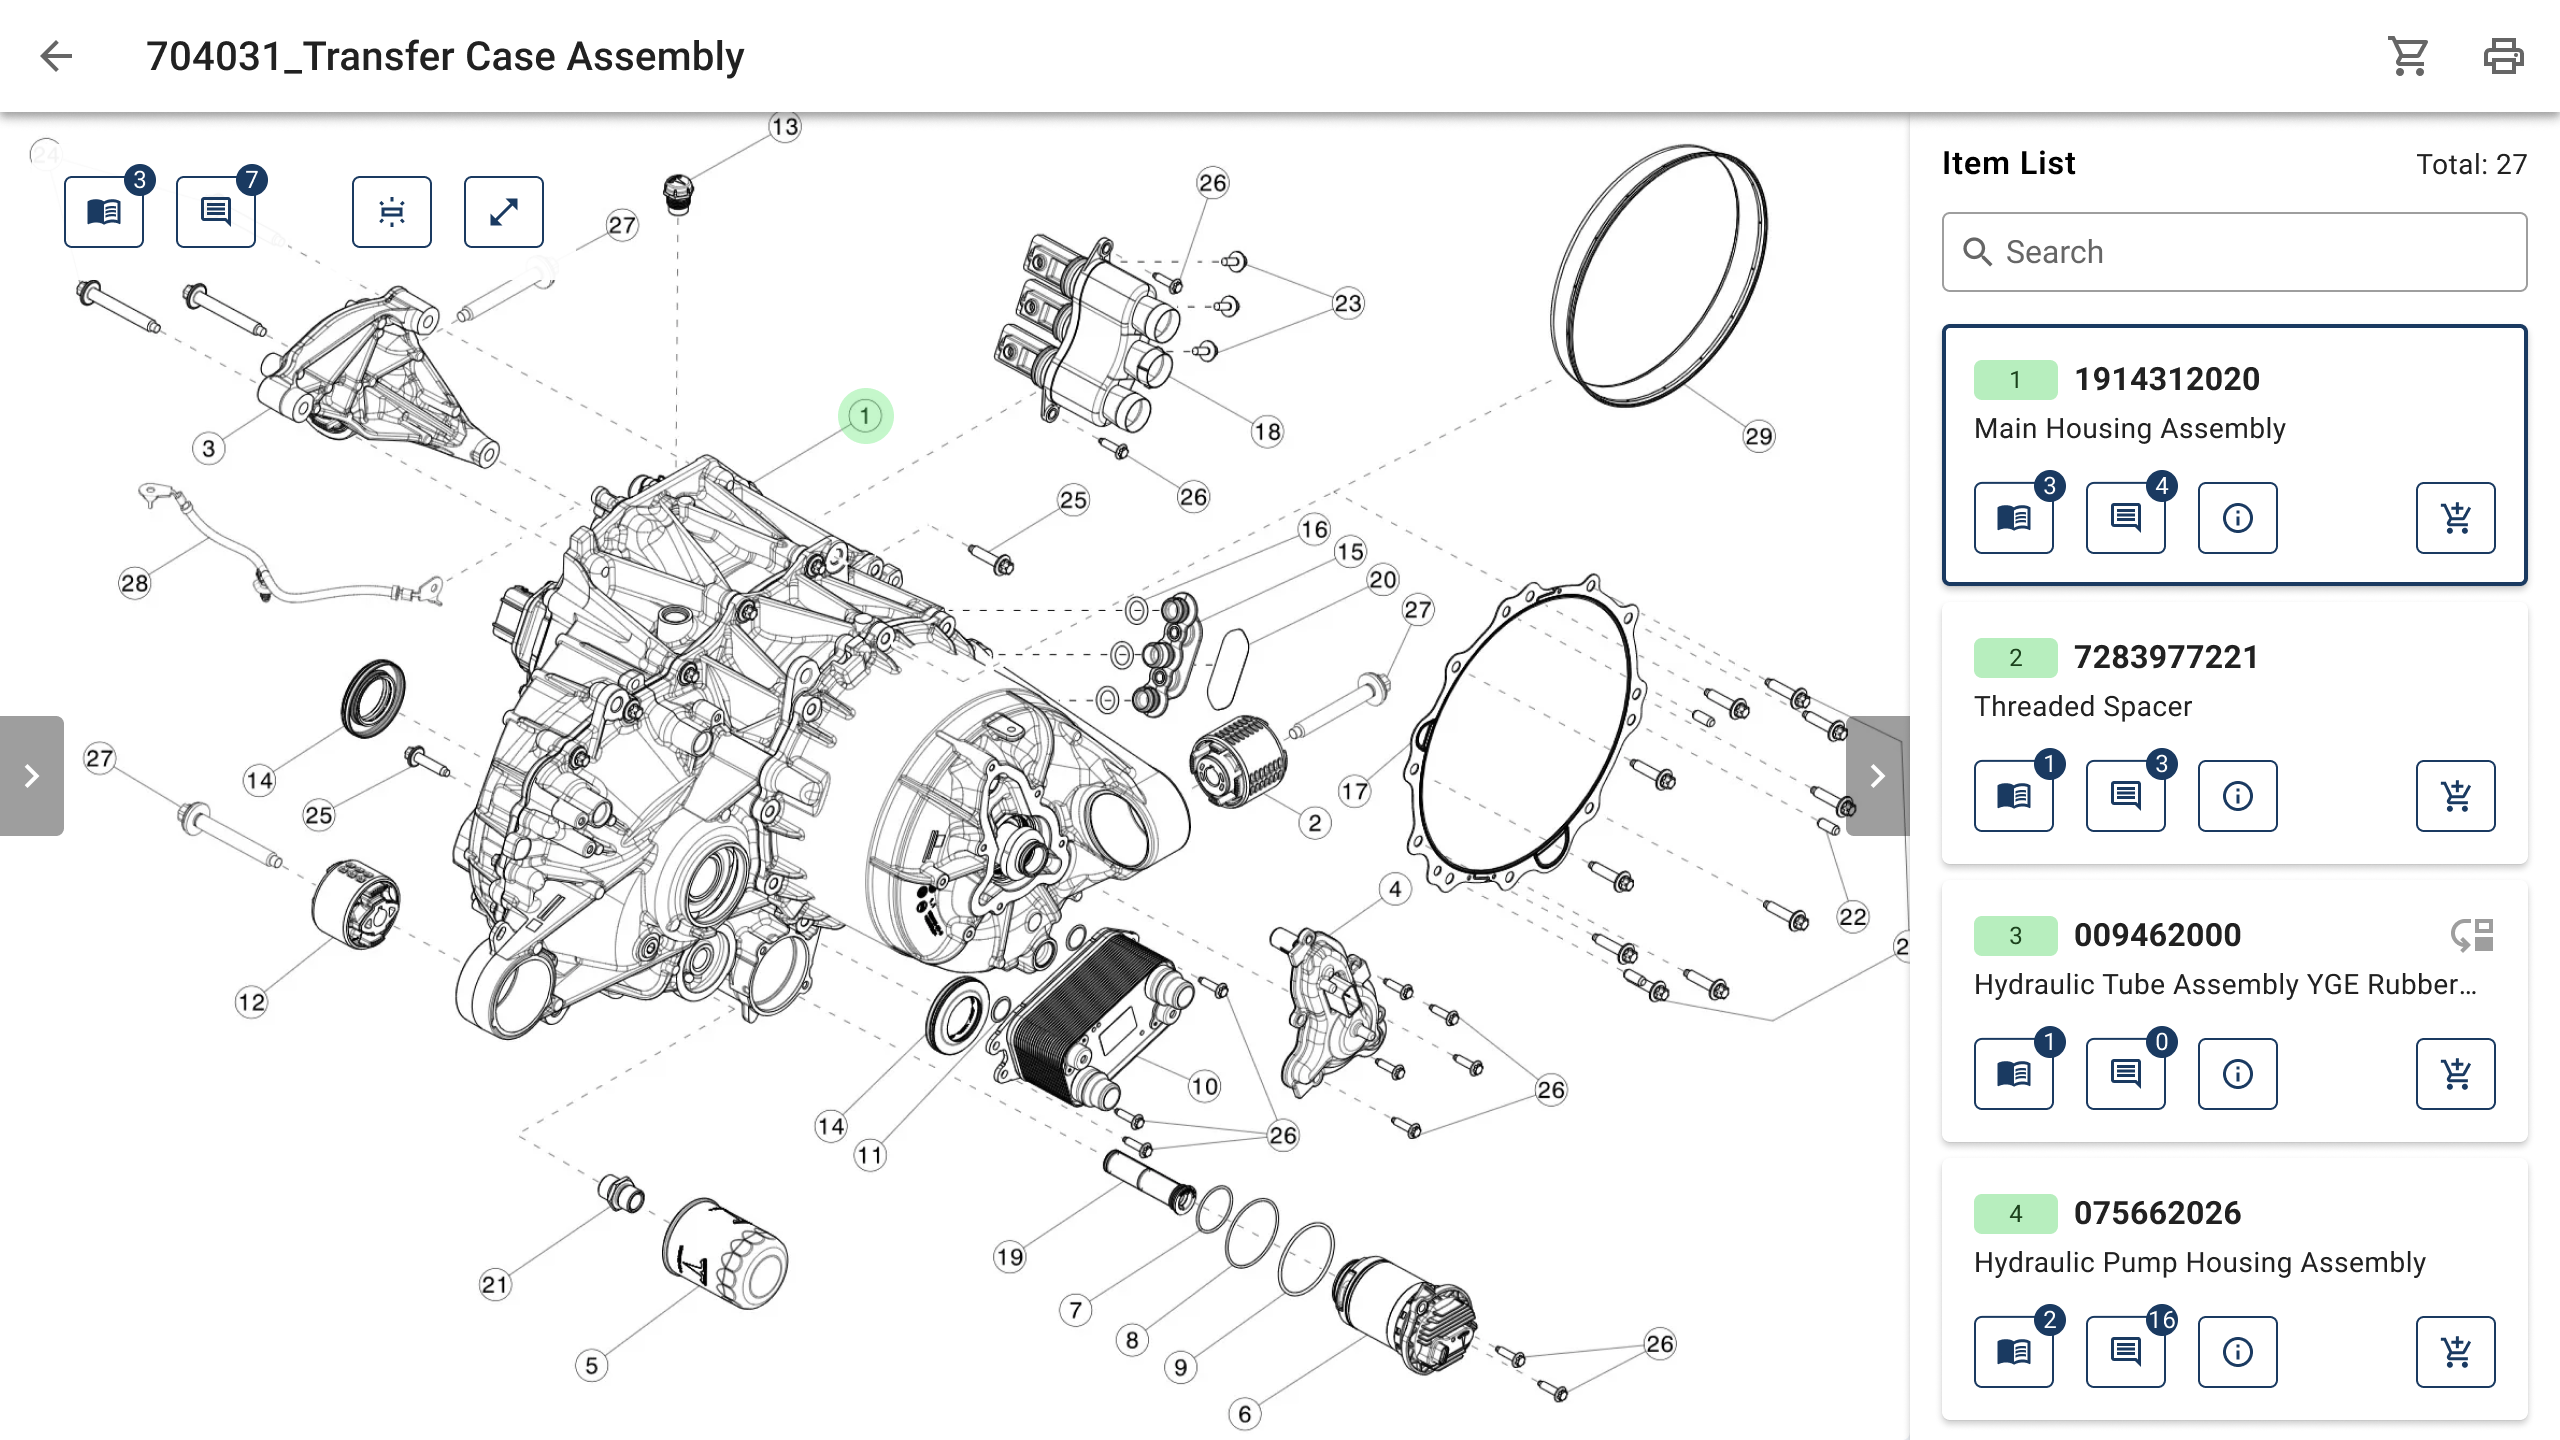 Syncron Parts Catalog with exploded view of assembly